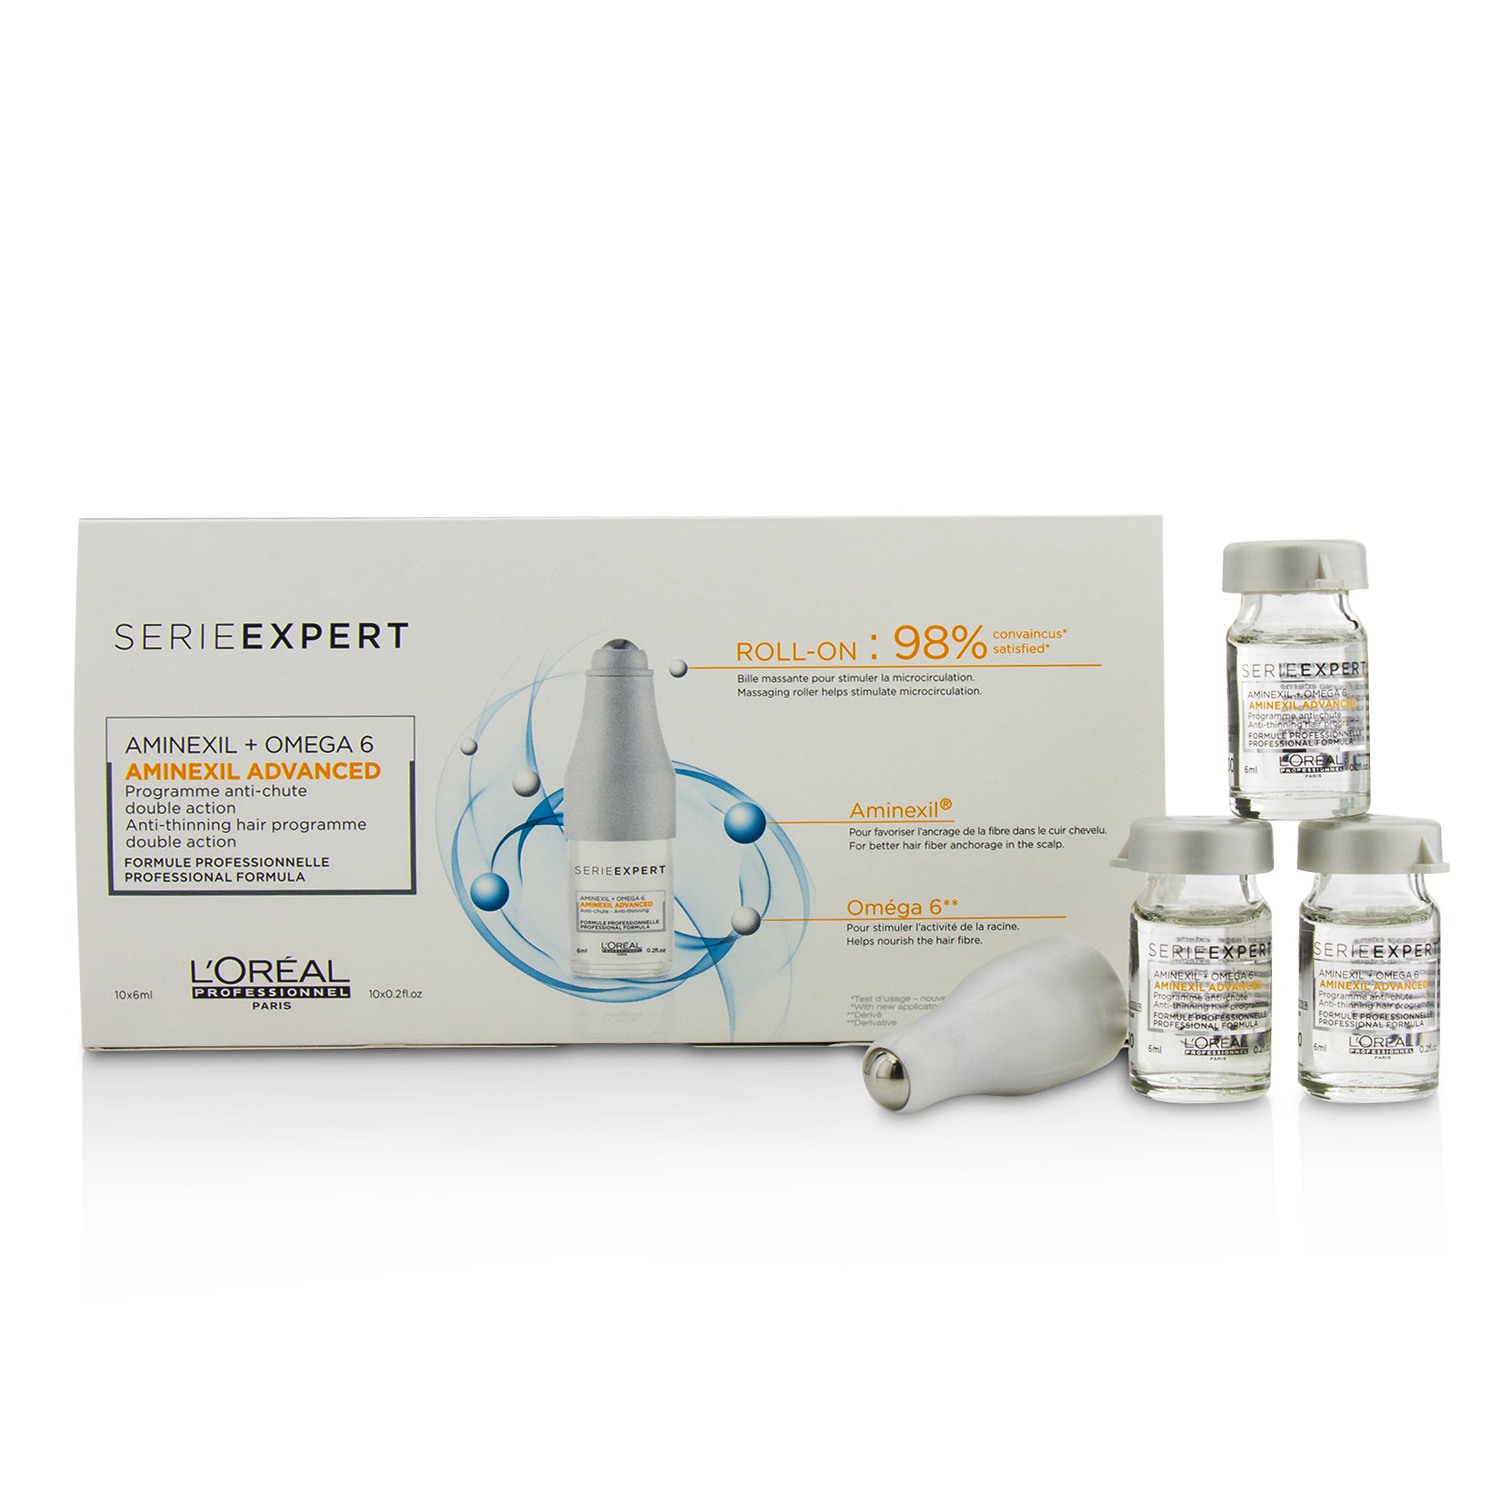 Professionnel Serie Expert - Aminexil Advanced Aminexil + Omega 6 Anti-Thinning Hair Programme Double Action LOreal Image